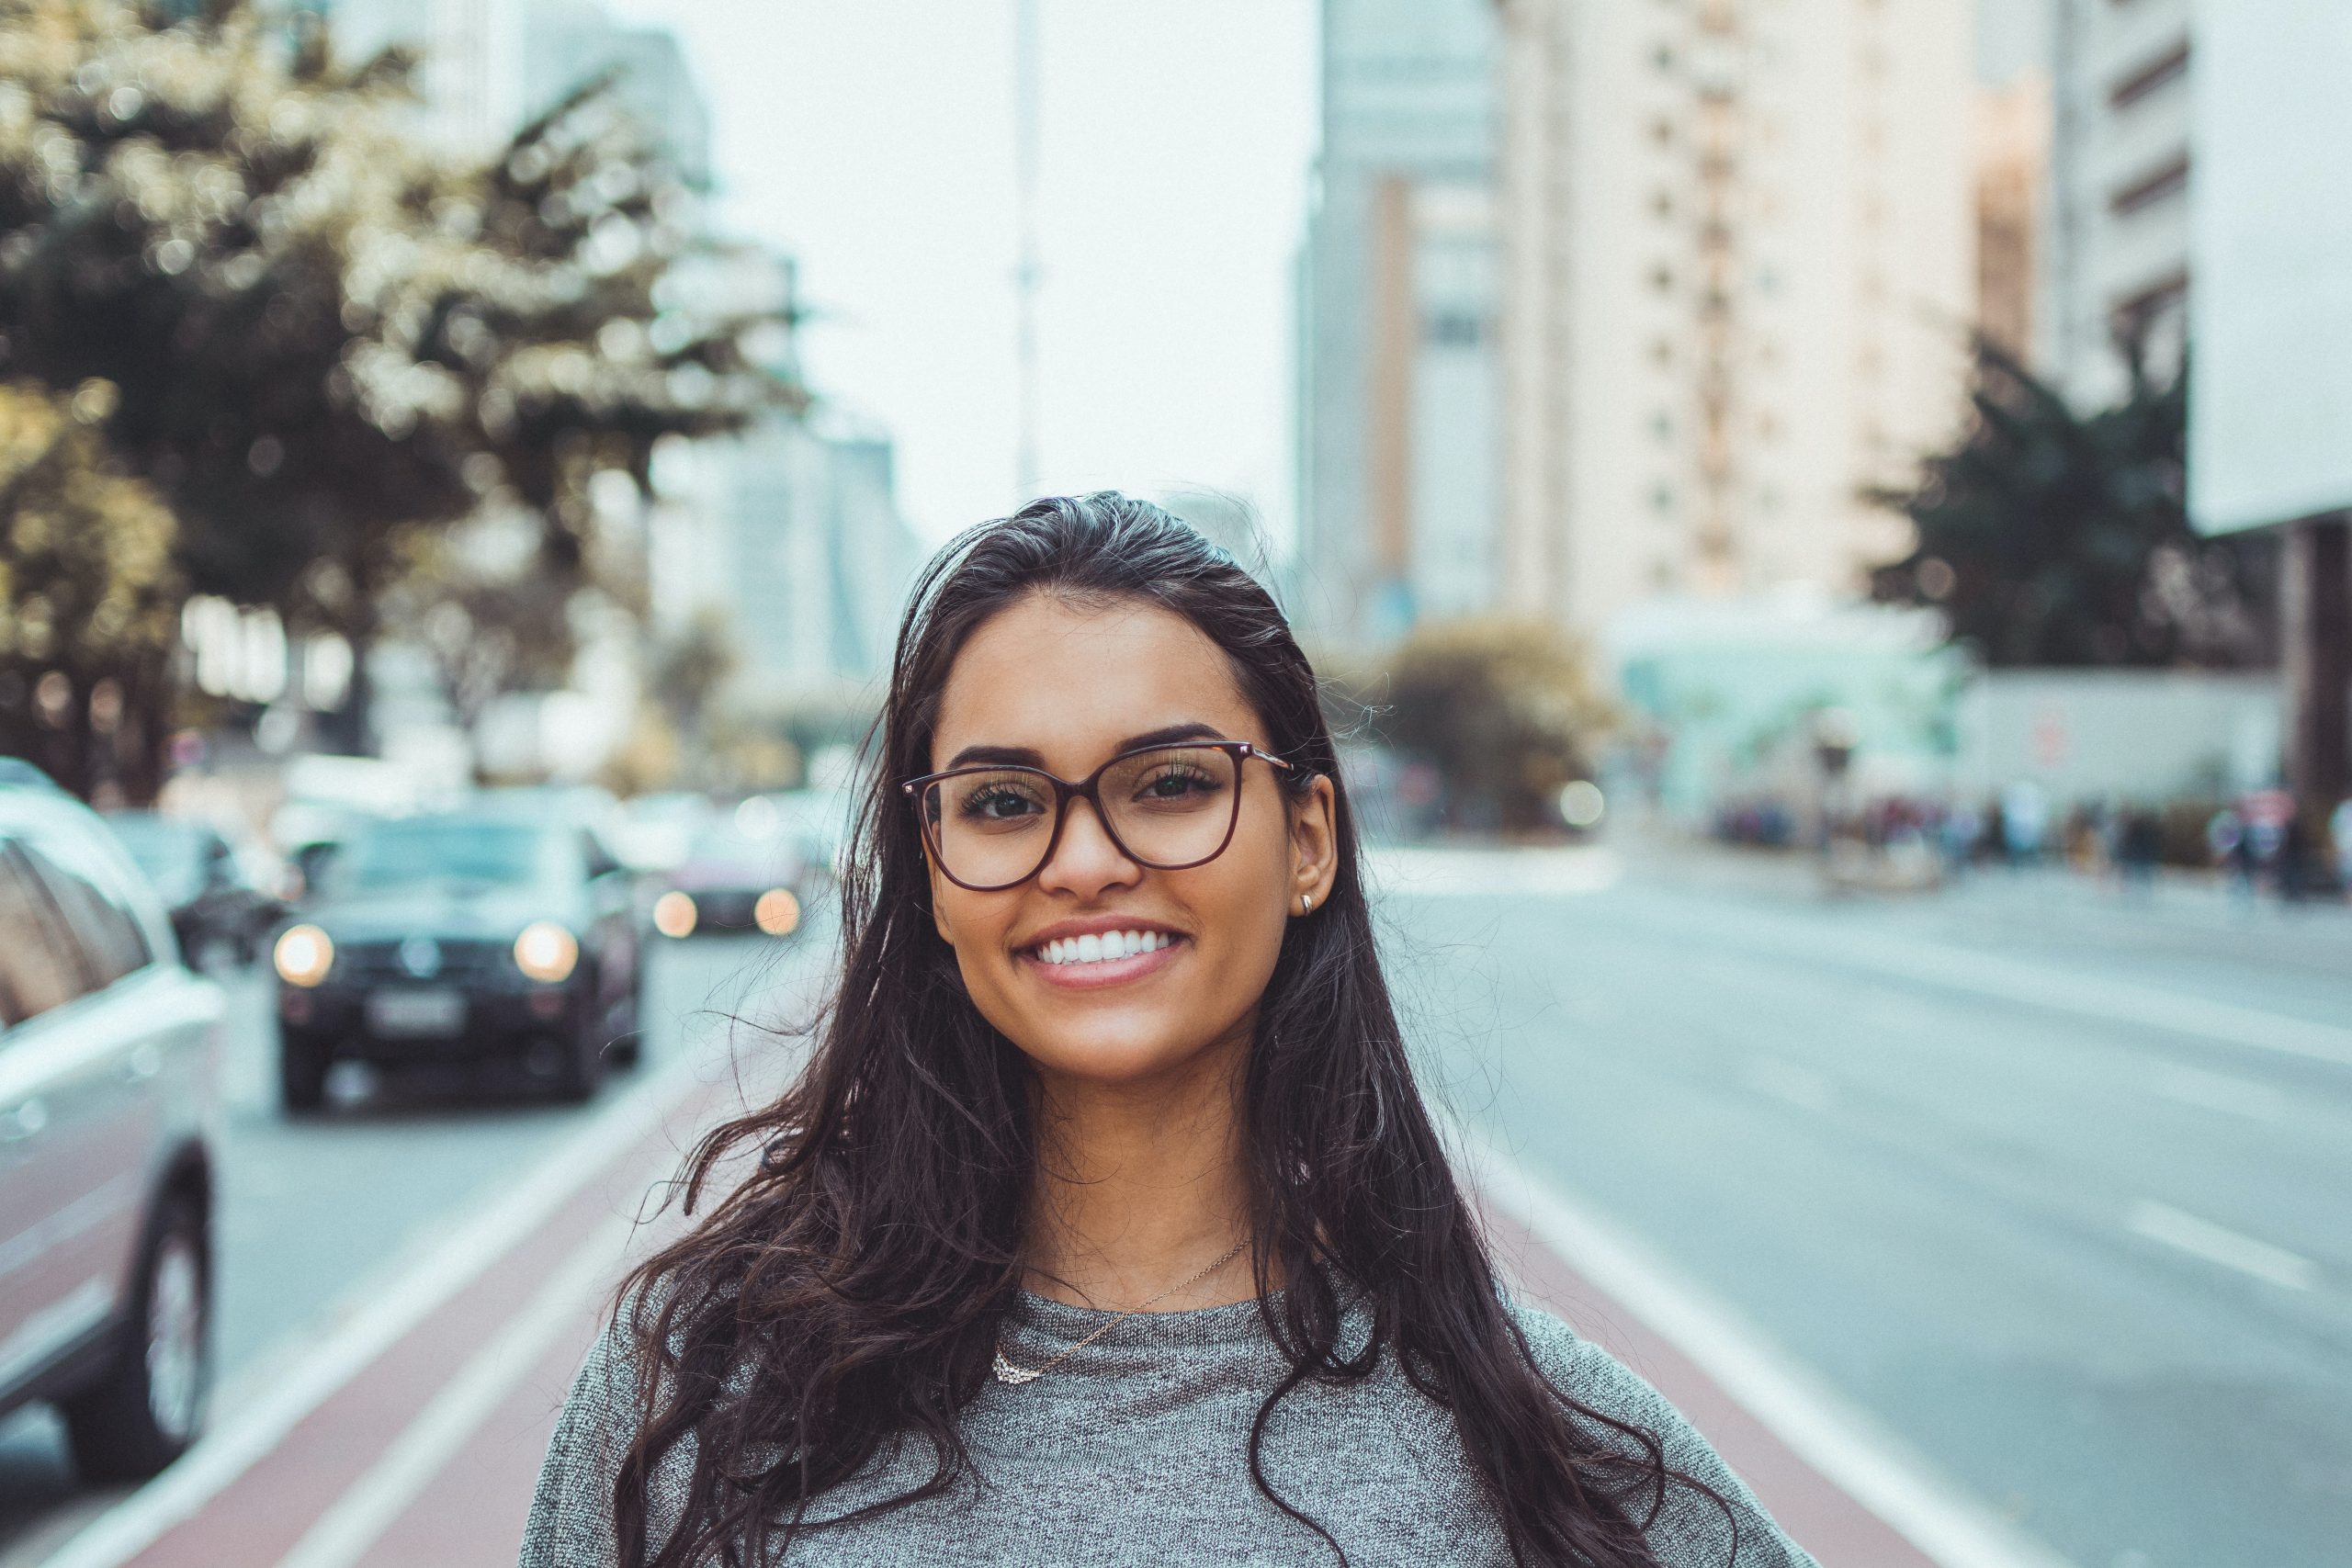 a woman standing on a street, smiling and is wearing glasses